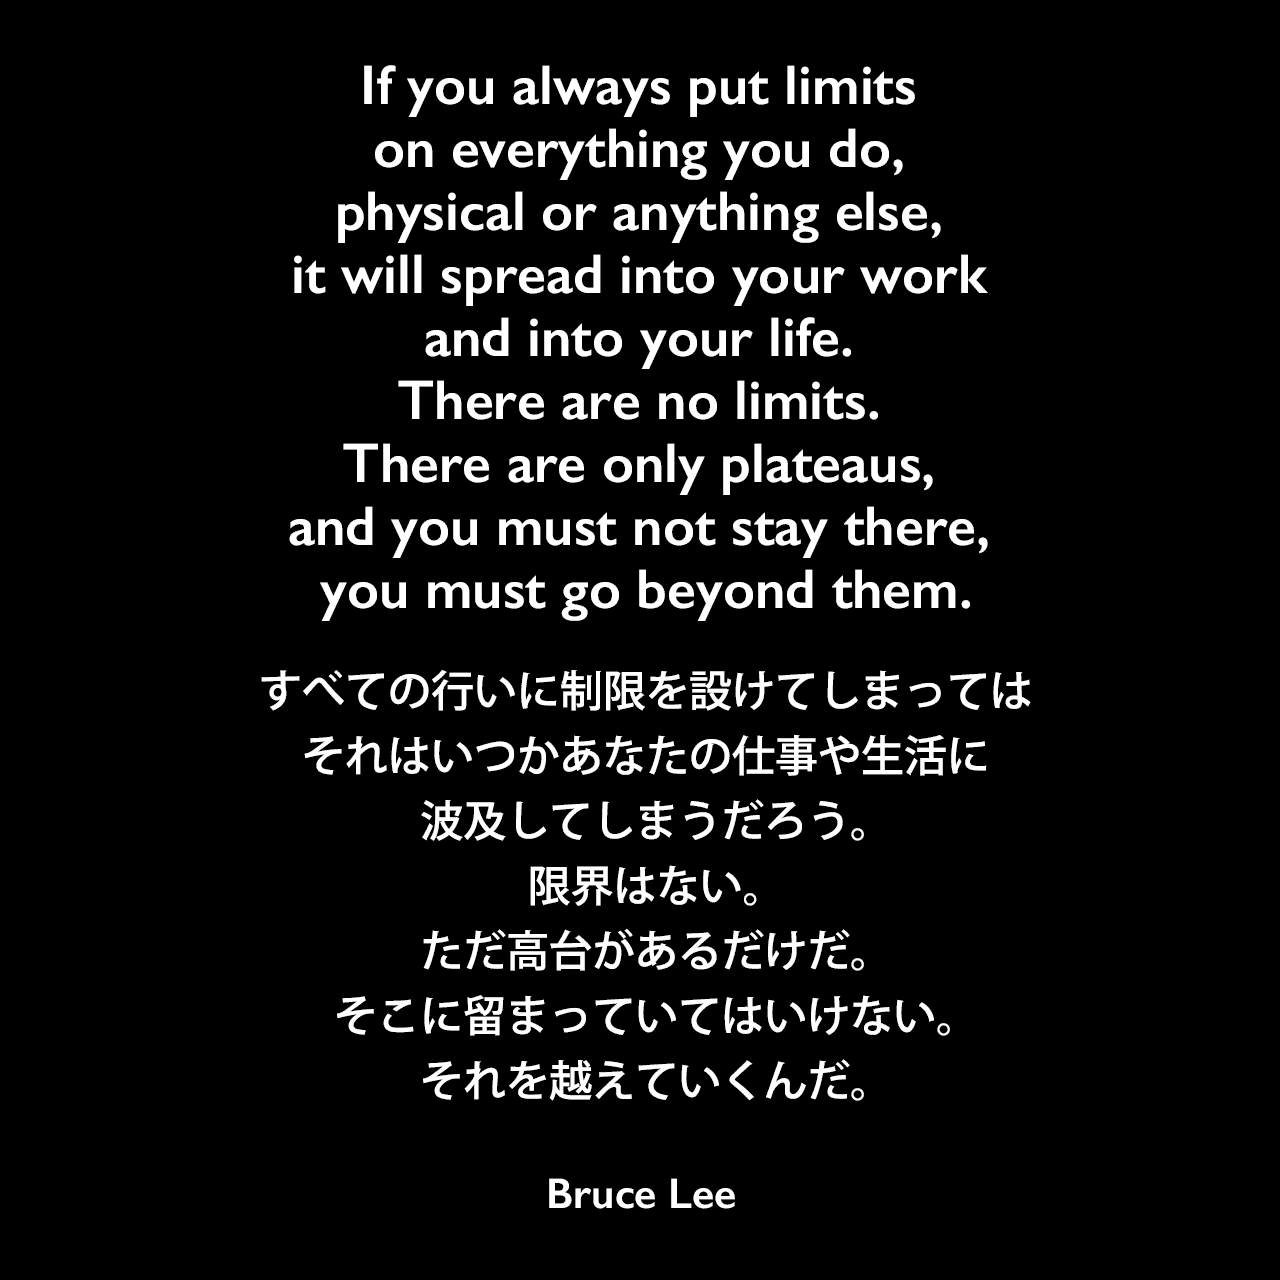 If you always put limits on everything you do, physical or anything else, it will spread into your work and into your life. There are no limits. There are only plateaus, and you must not stay there, you must go beyond them.すべての行いに制限を設けてしまっては、それはいつかあなたの仕事や生活に波及してしまうだろう。限界はない。ただ高台があるだけだ。そこに留まっていてはいけない。それを越えていくんだ。Bruce Lee